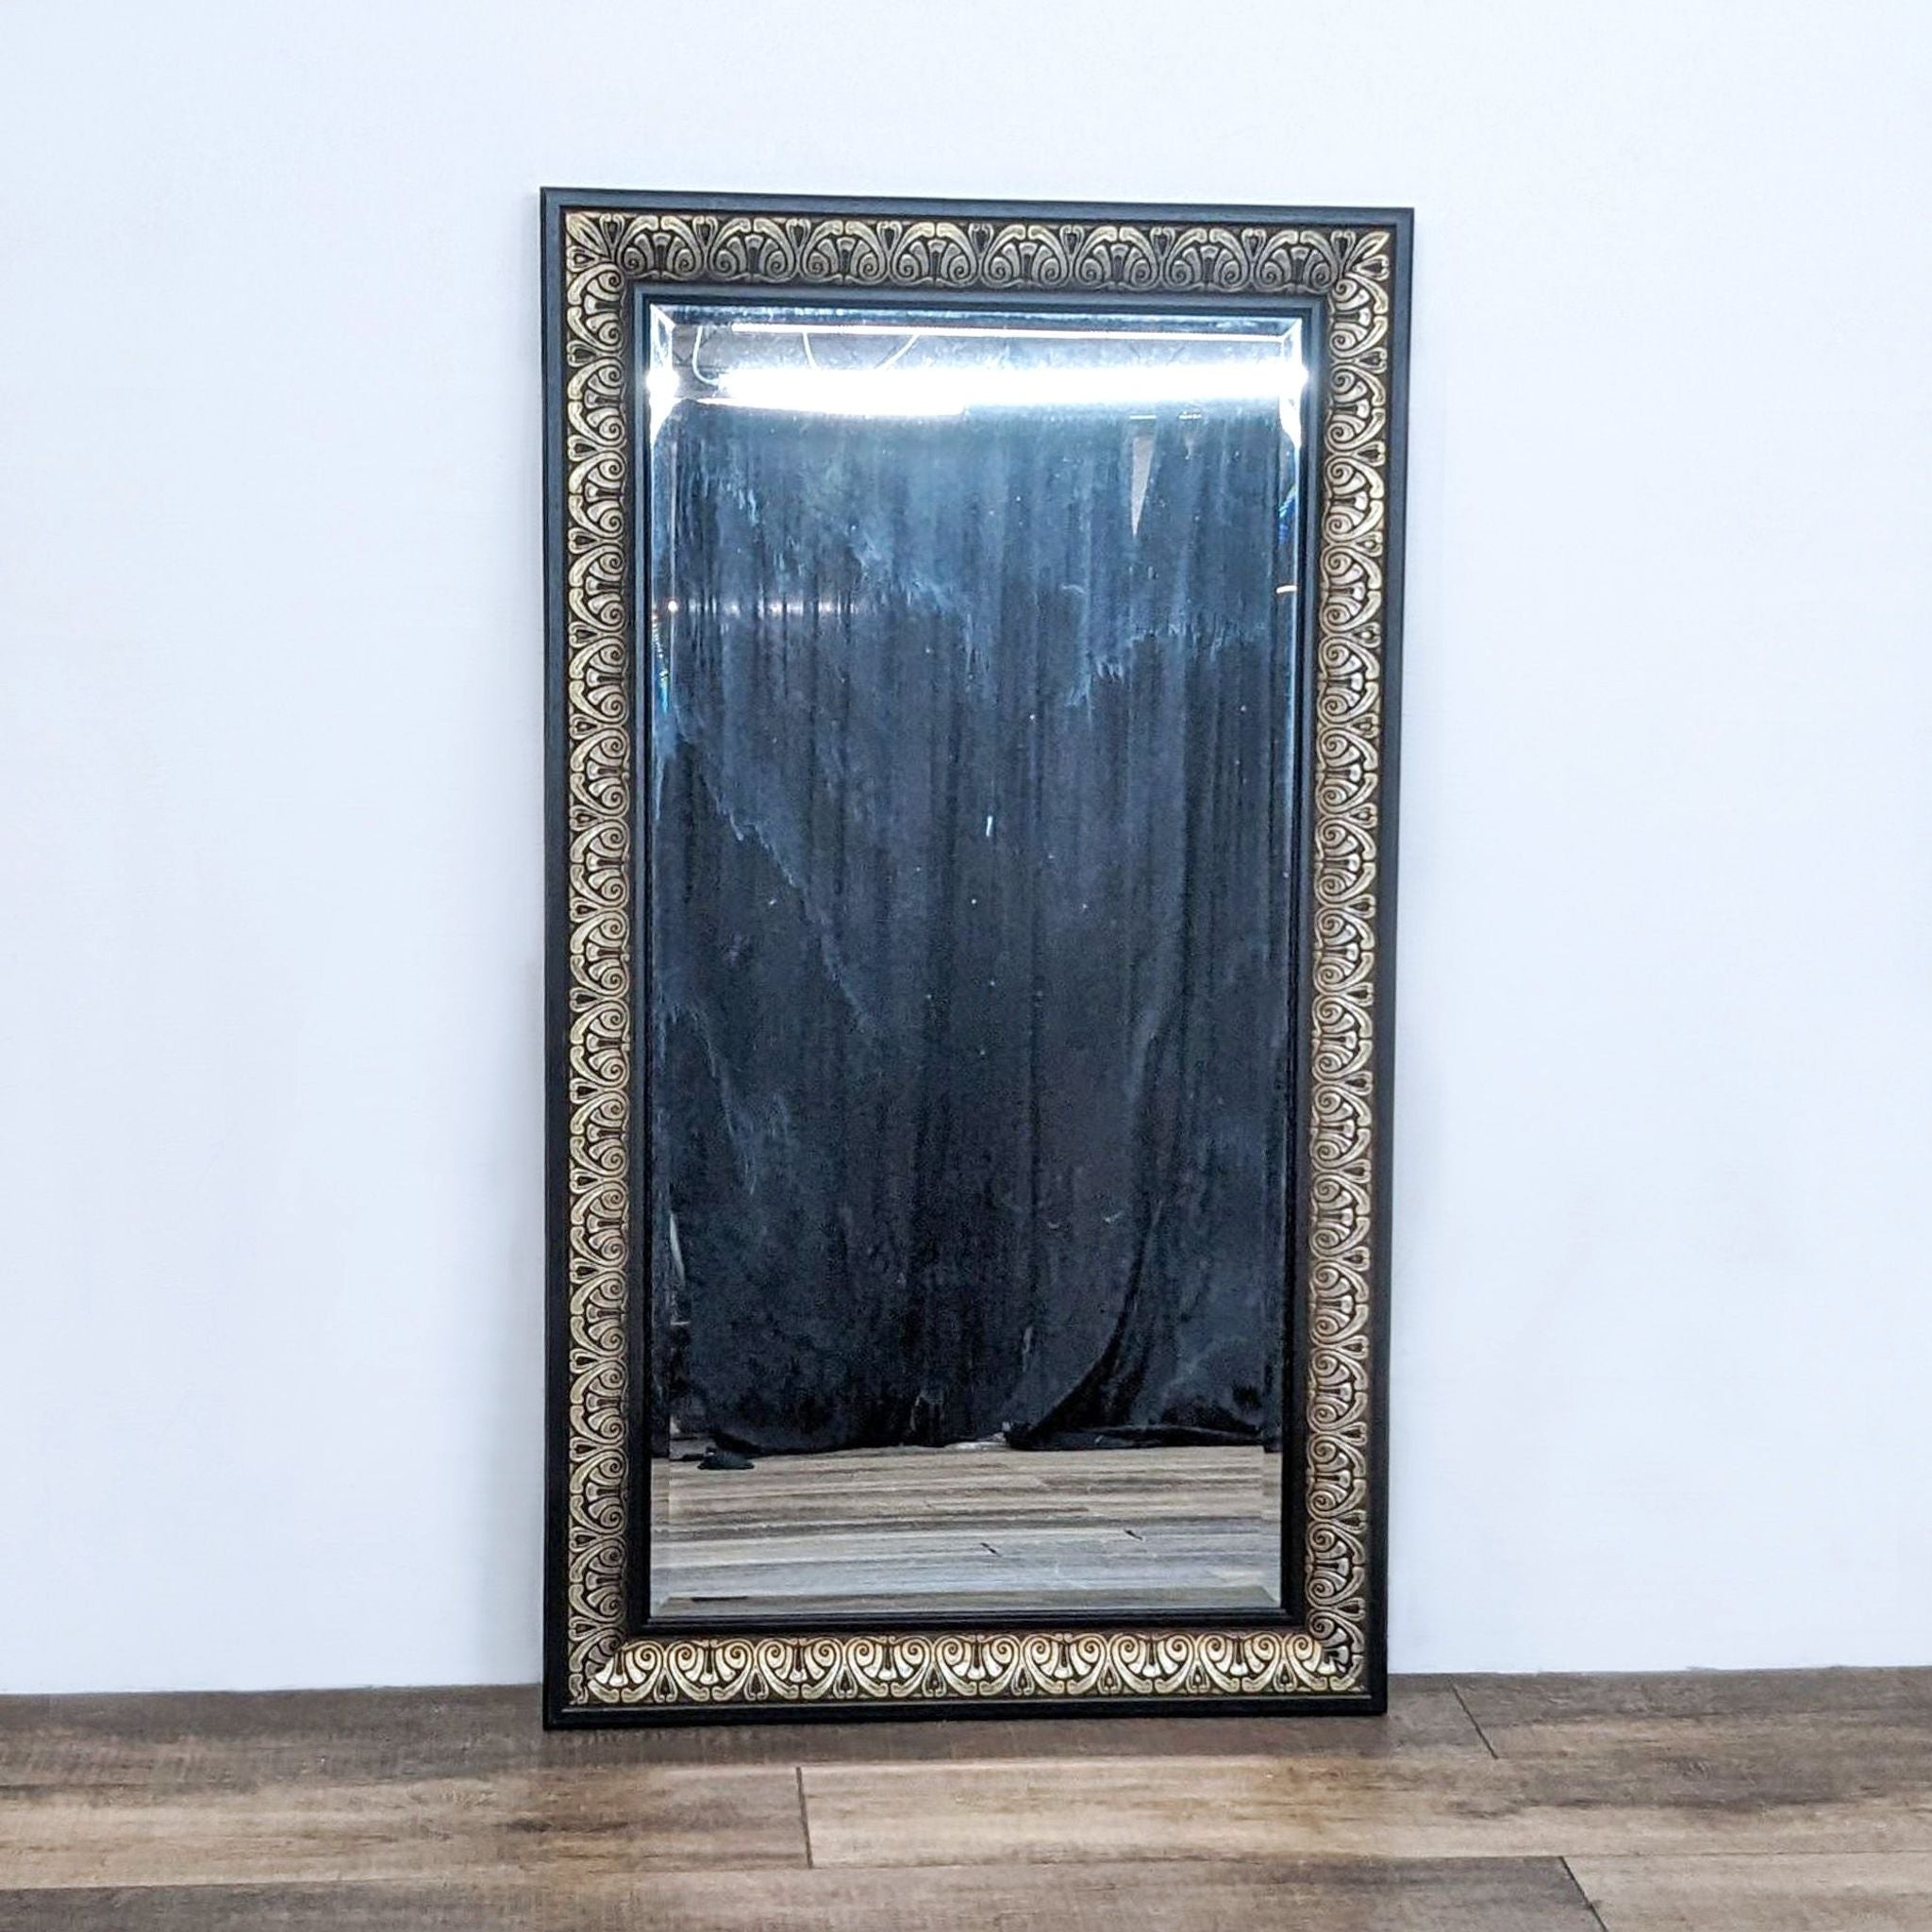 1. World Market antique brass-finished rectangle mirror with carved detailing on a dark frame, displayed against a white wall and wooden floor.